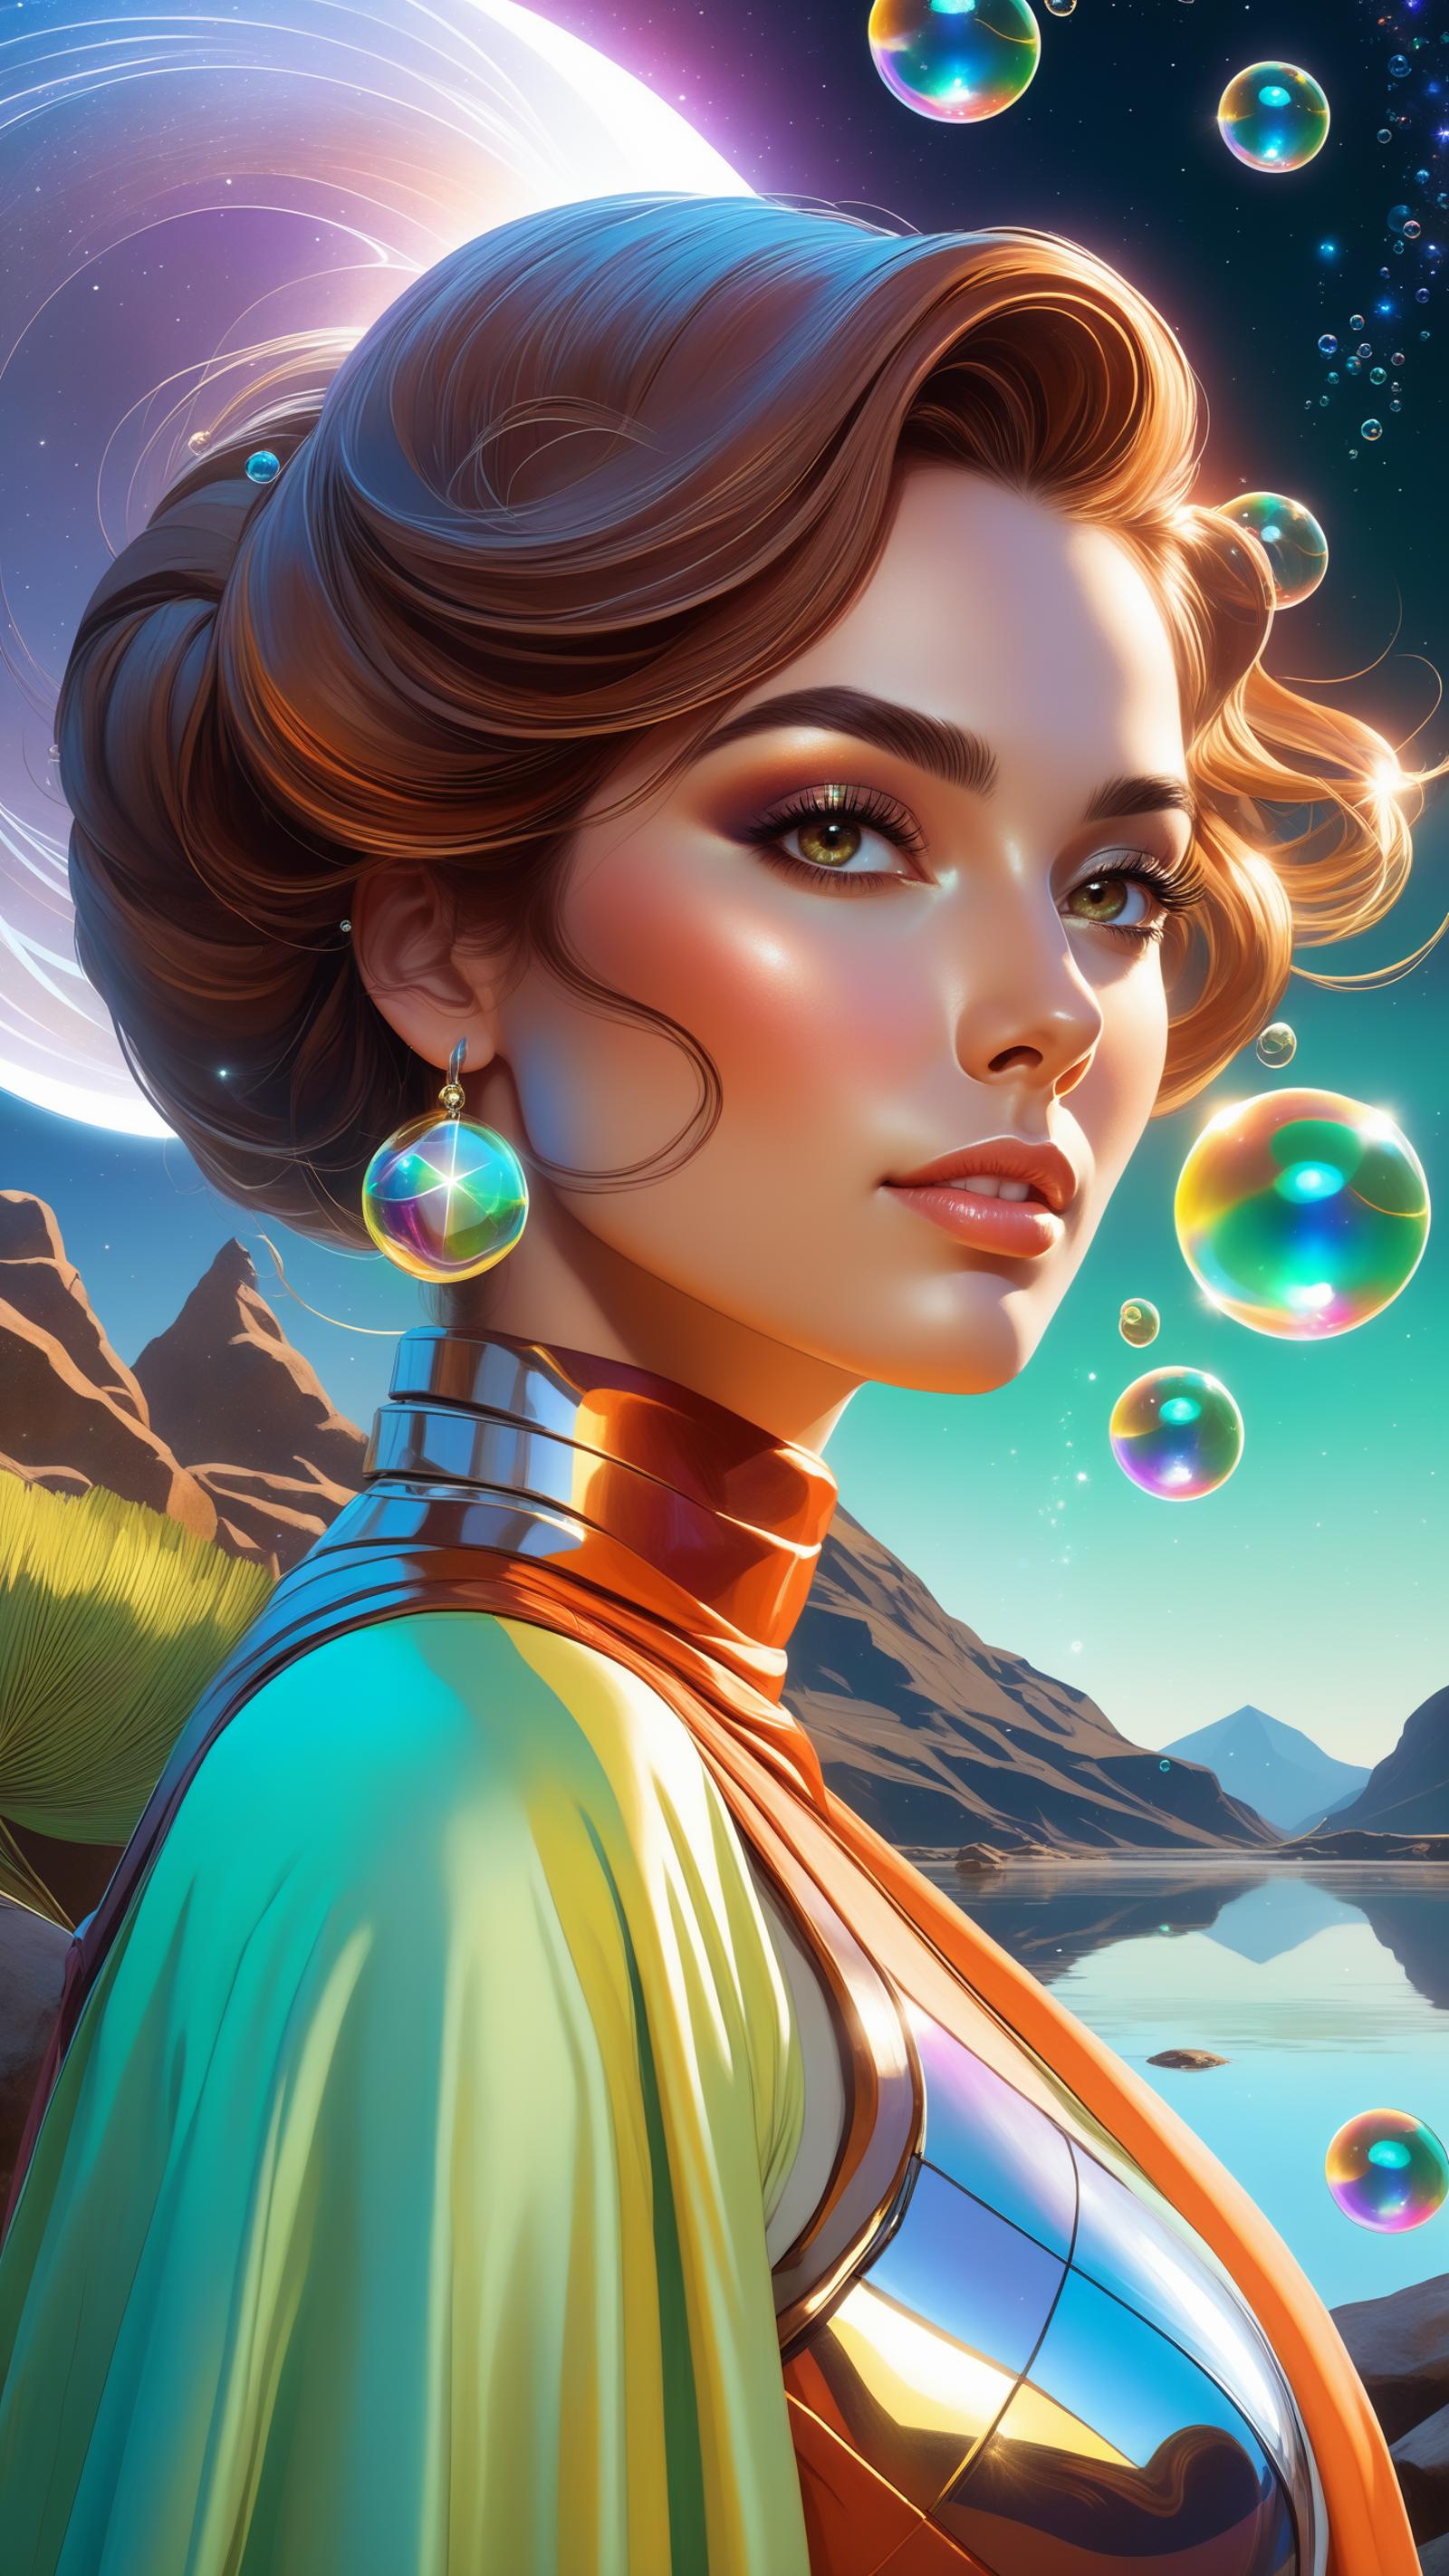 Digital Art of a Woman with Bubbles and Mountains in the Background